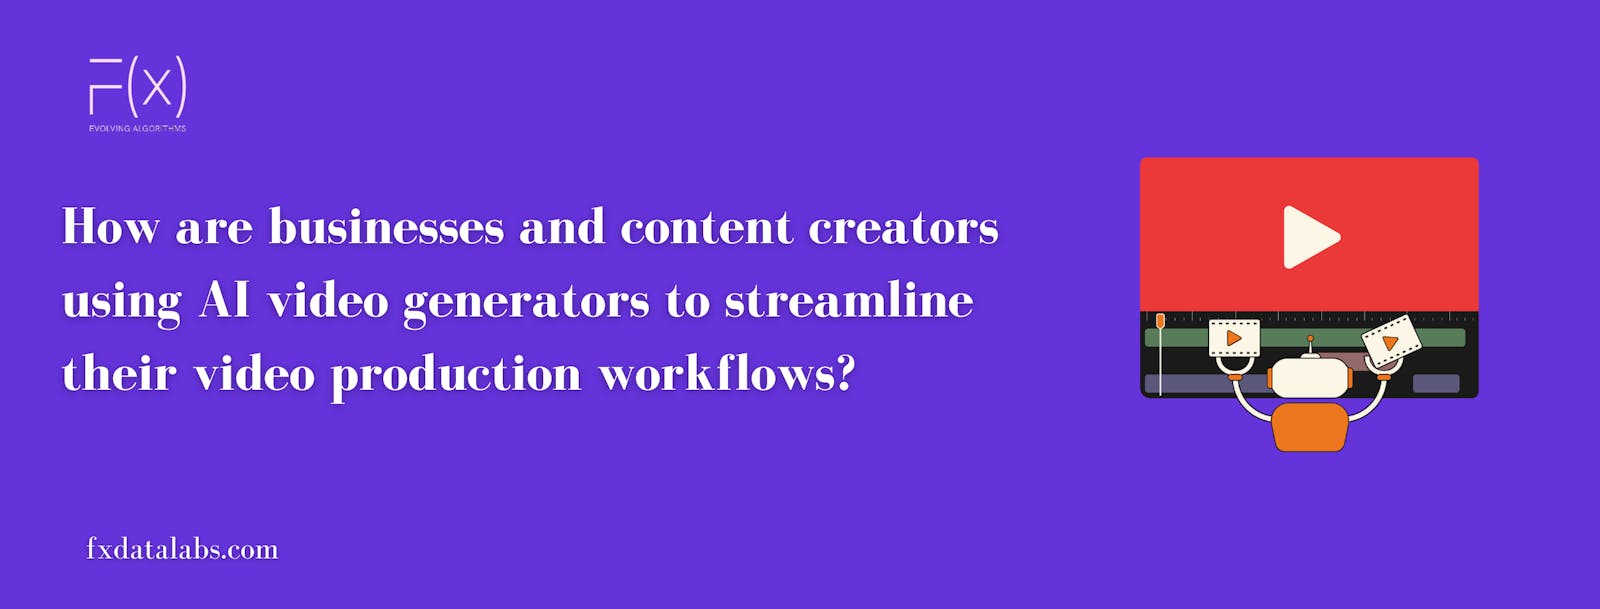 How are businesses and content creators using AI video generators to streamline their video production workflows?